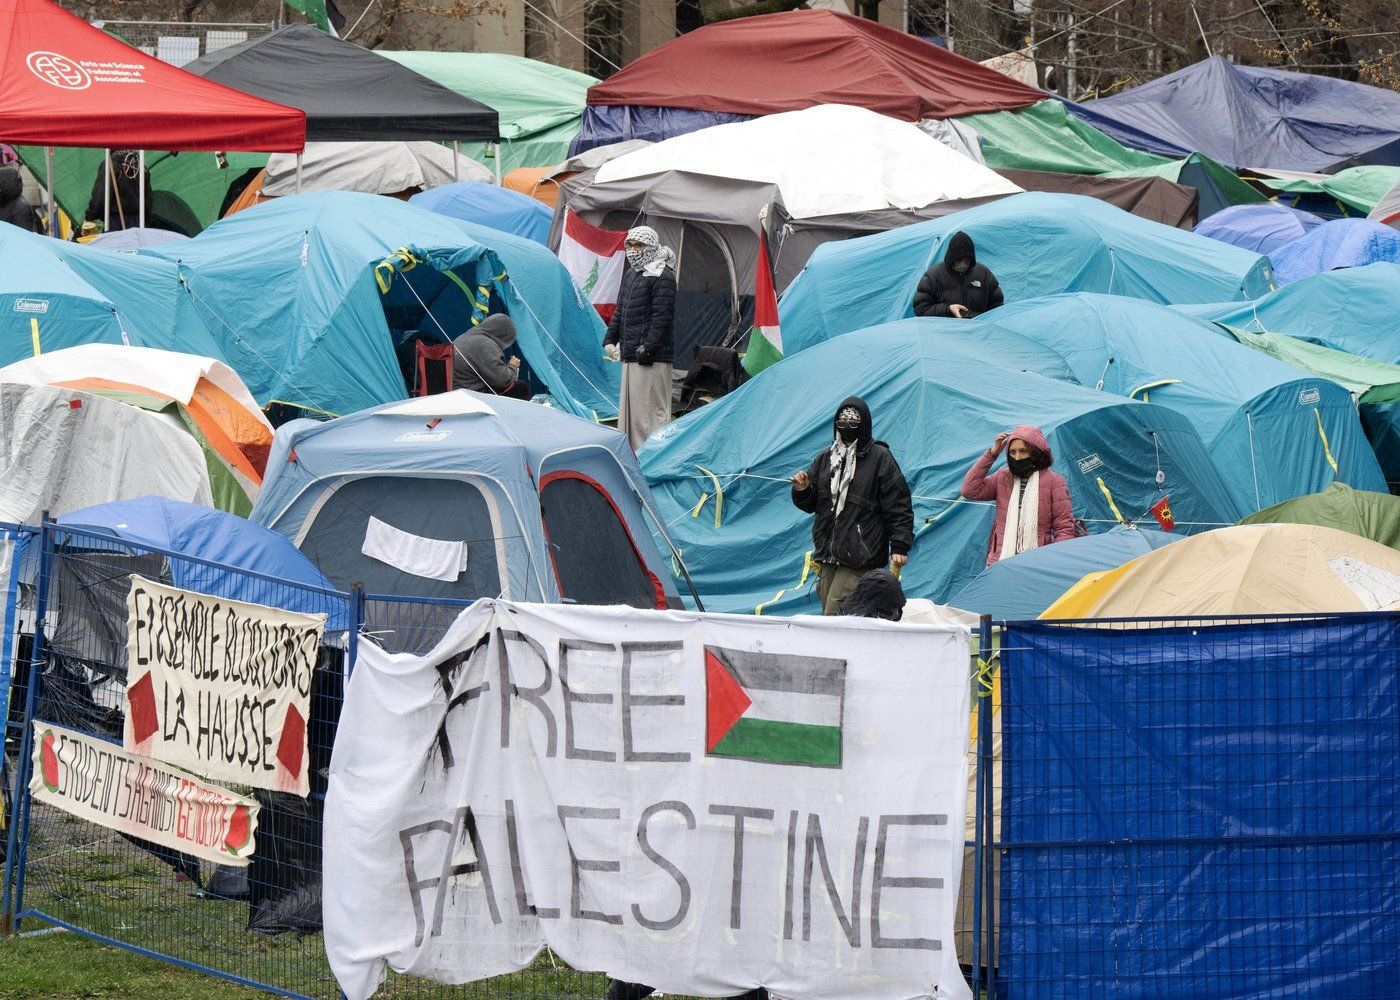 Pro-Palestinian encampments: Protests break out at universities in Montreal, Toronto